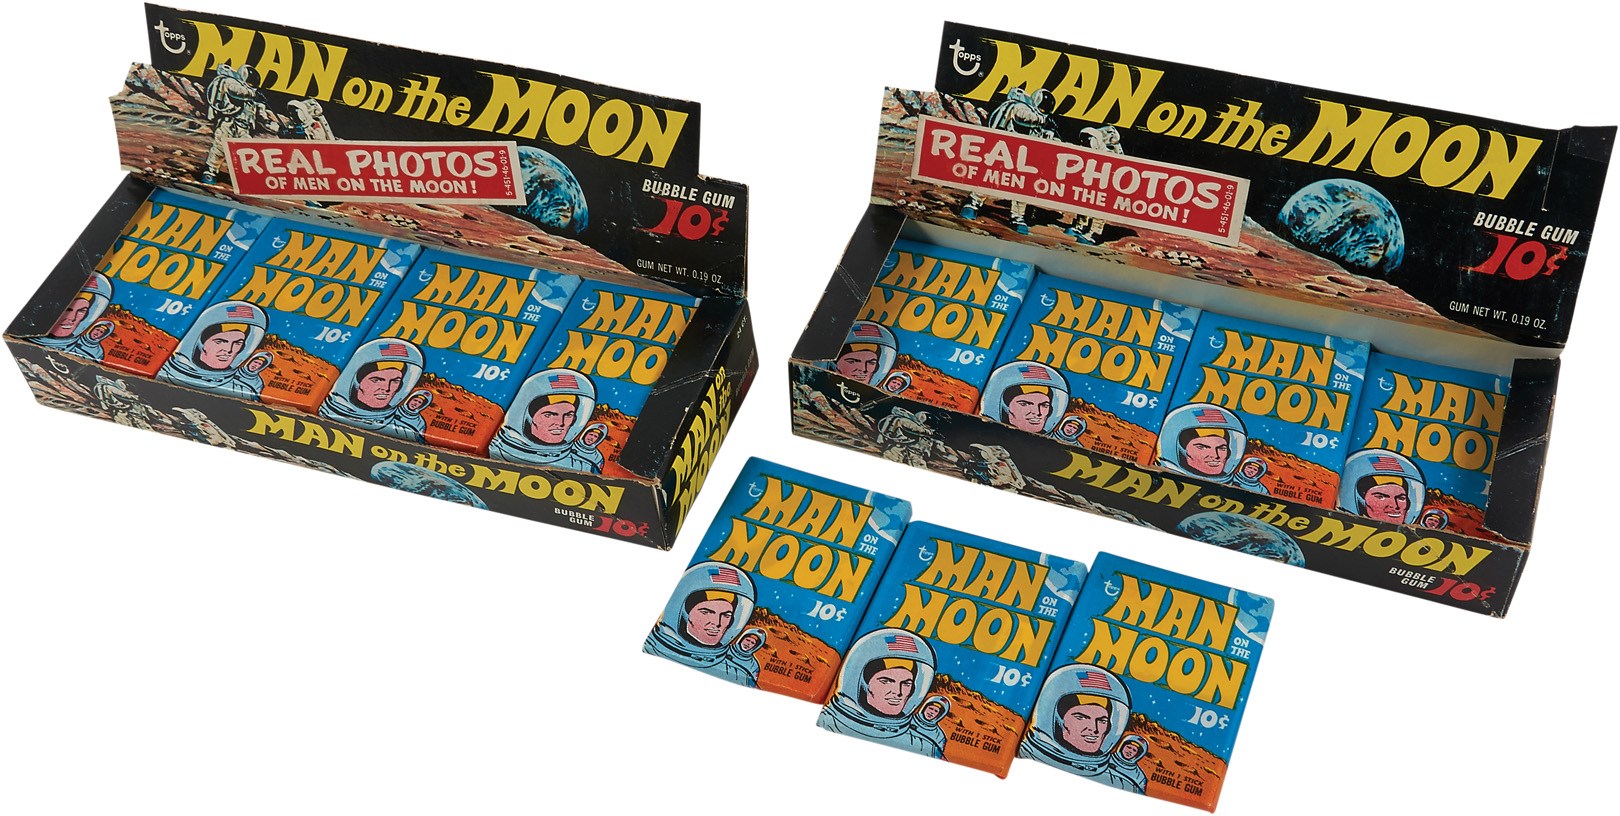 Baseball and Trading Cards - 1970 Topps Man on the Moon Wax Boxes (2)